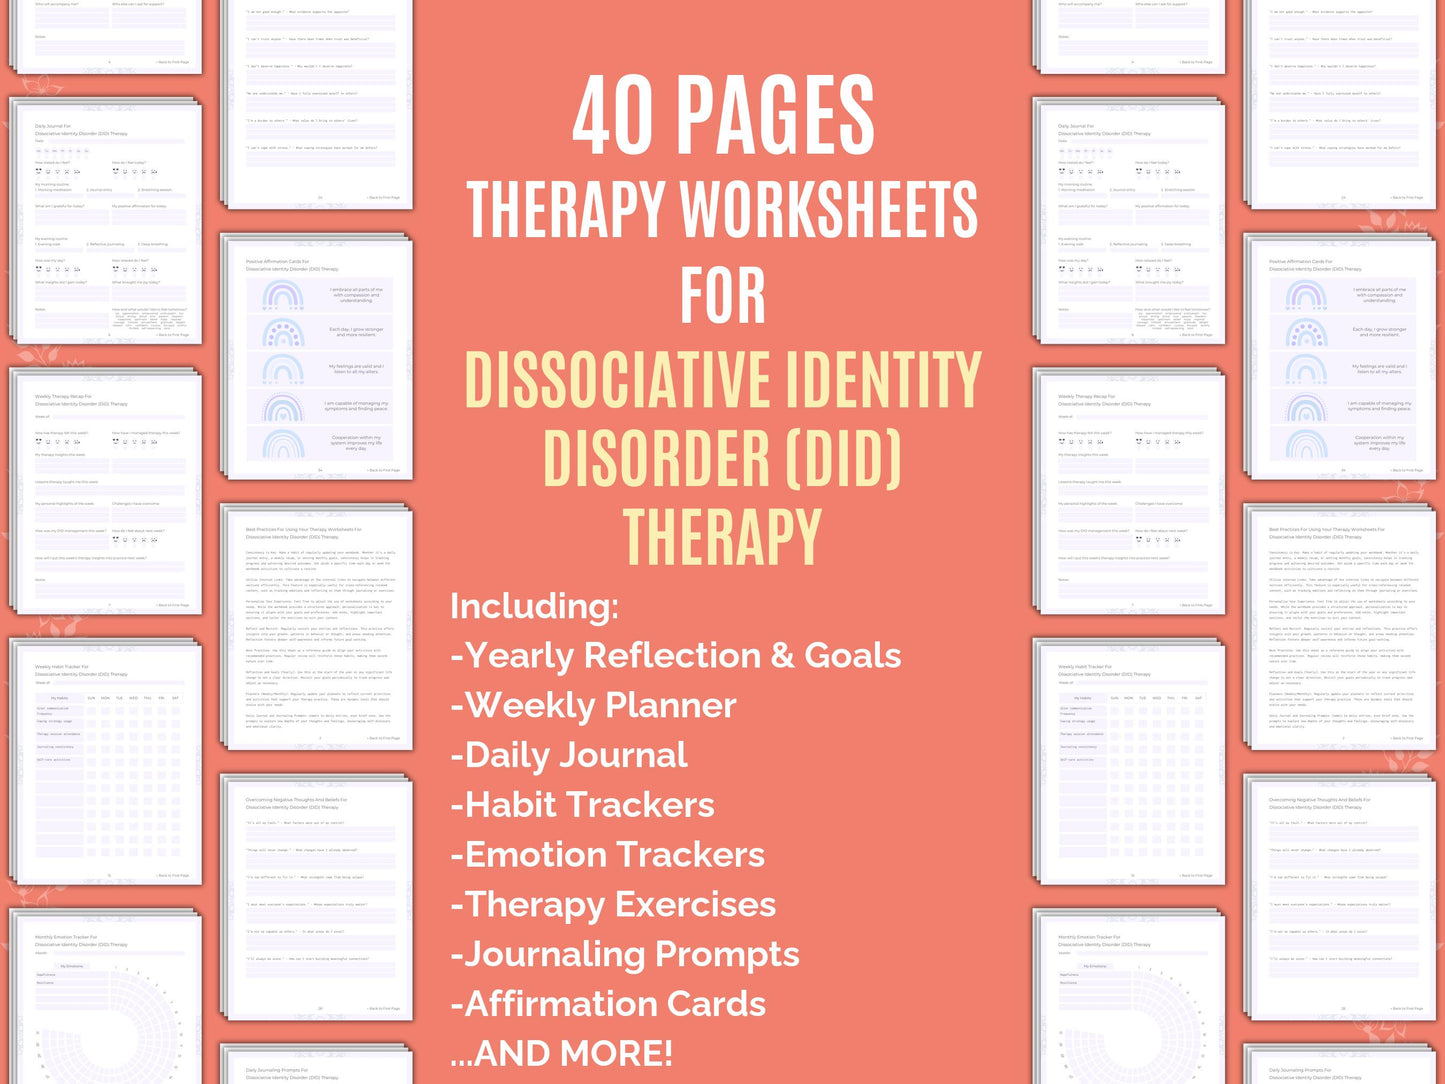 DID Templates, DID Workbooks, Dissociative, DID Resources, DID Notes, DID Planners, DID Counseling, Identity, Disorder, DID Tools, DID Goal Setting, DID Cheat Sheet, DID Therapy, DID Journaling, DID Journals